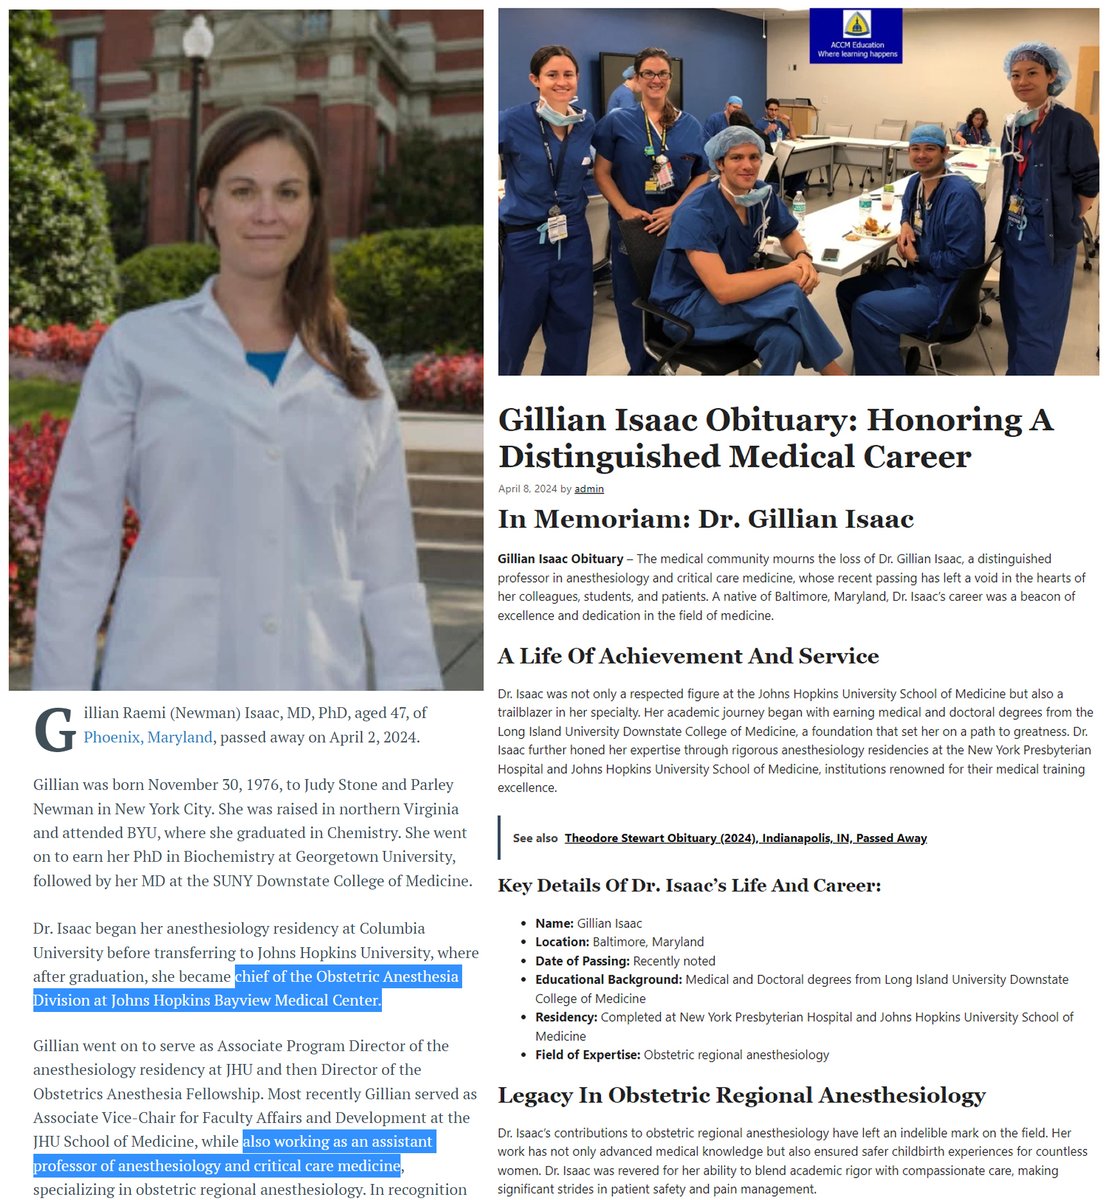 US DOCTOR DEAD - 47 year old Dr.Gillian Isaac MD PhD, of Phoenix MD, died suddenly on April 2, 2024.

She was Chief of Obstetric Anesthesia Division at Johns Hopkins Bayview Medical Center, and assistant professor of anesthesiology and critical care medicine

COVID-19 mRNA…